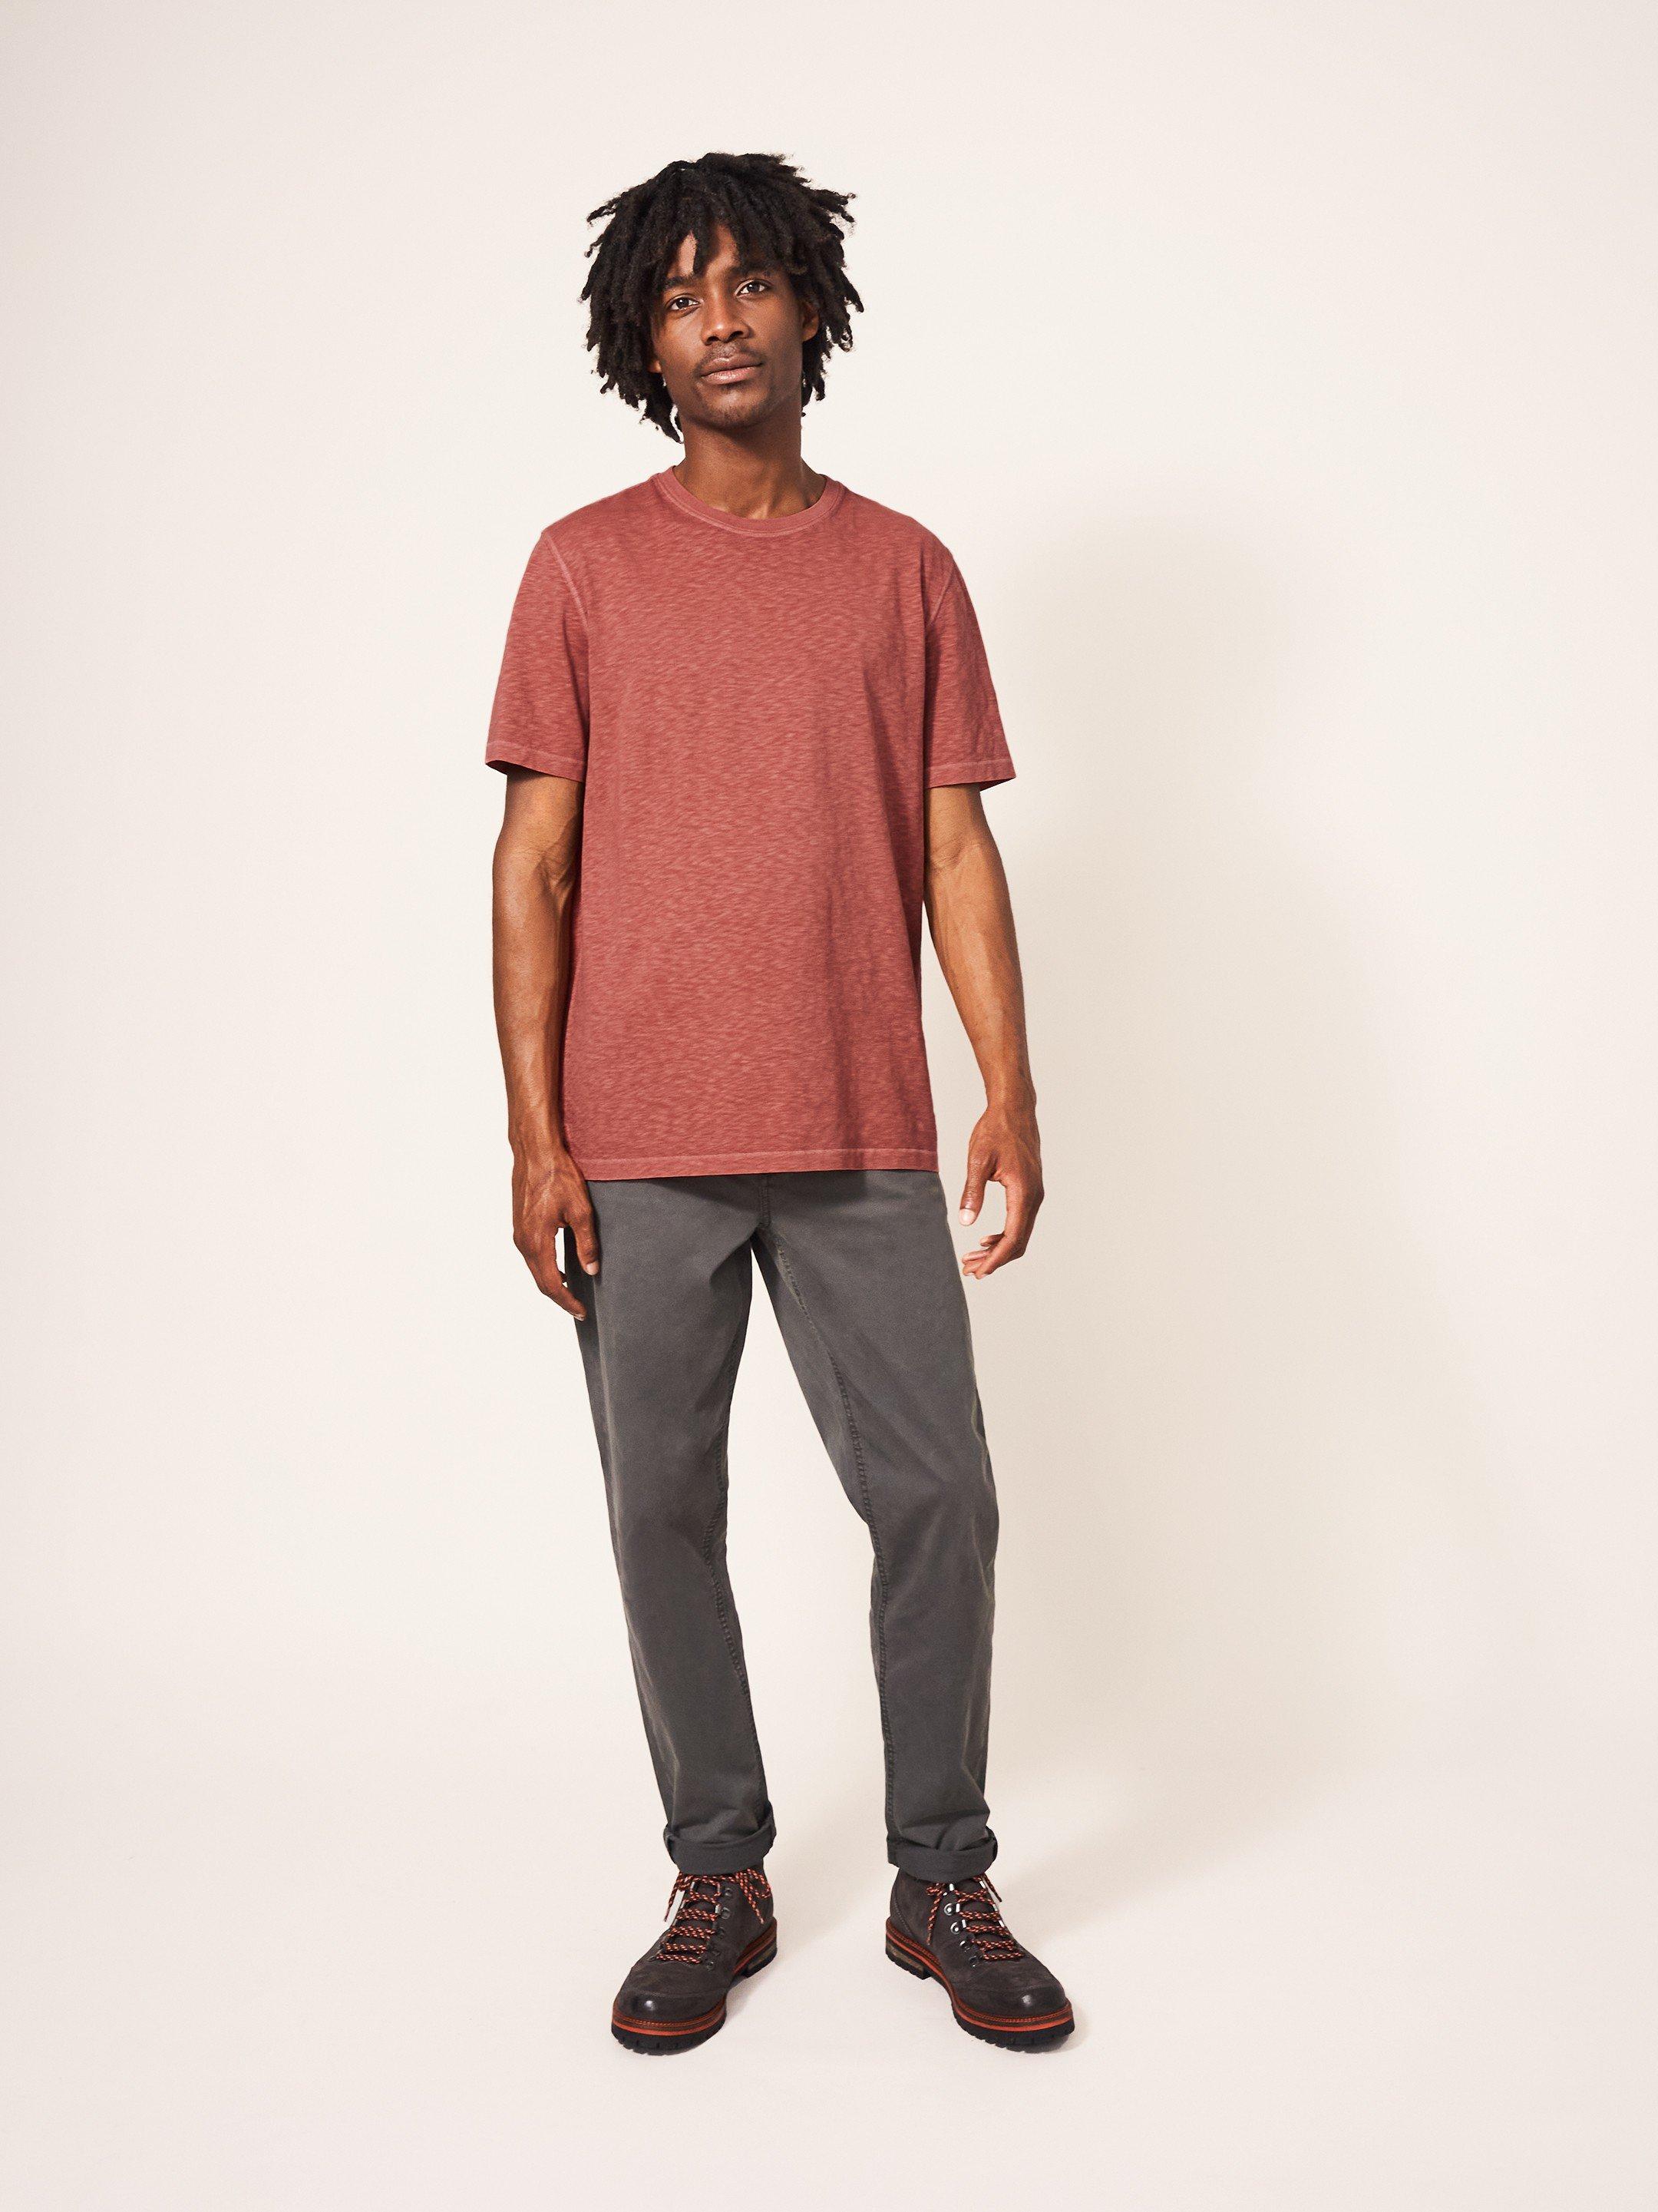 Abersoch Short Sleeve Tee in MID RED - MODEL FRONT